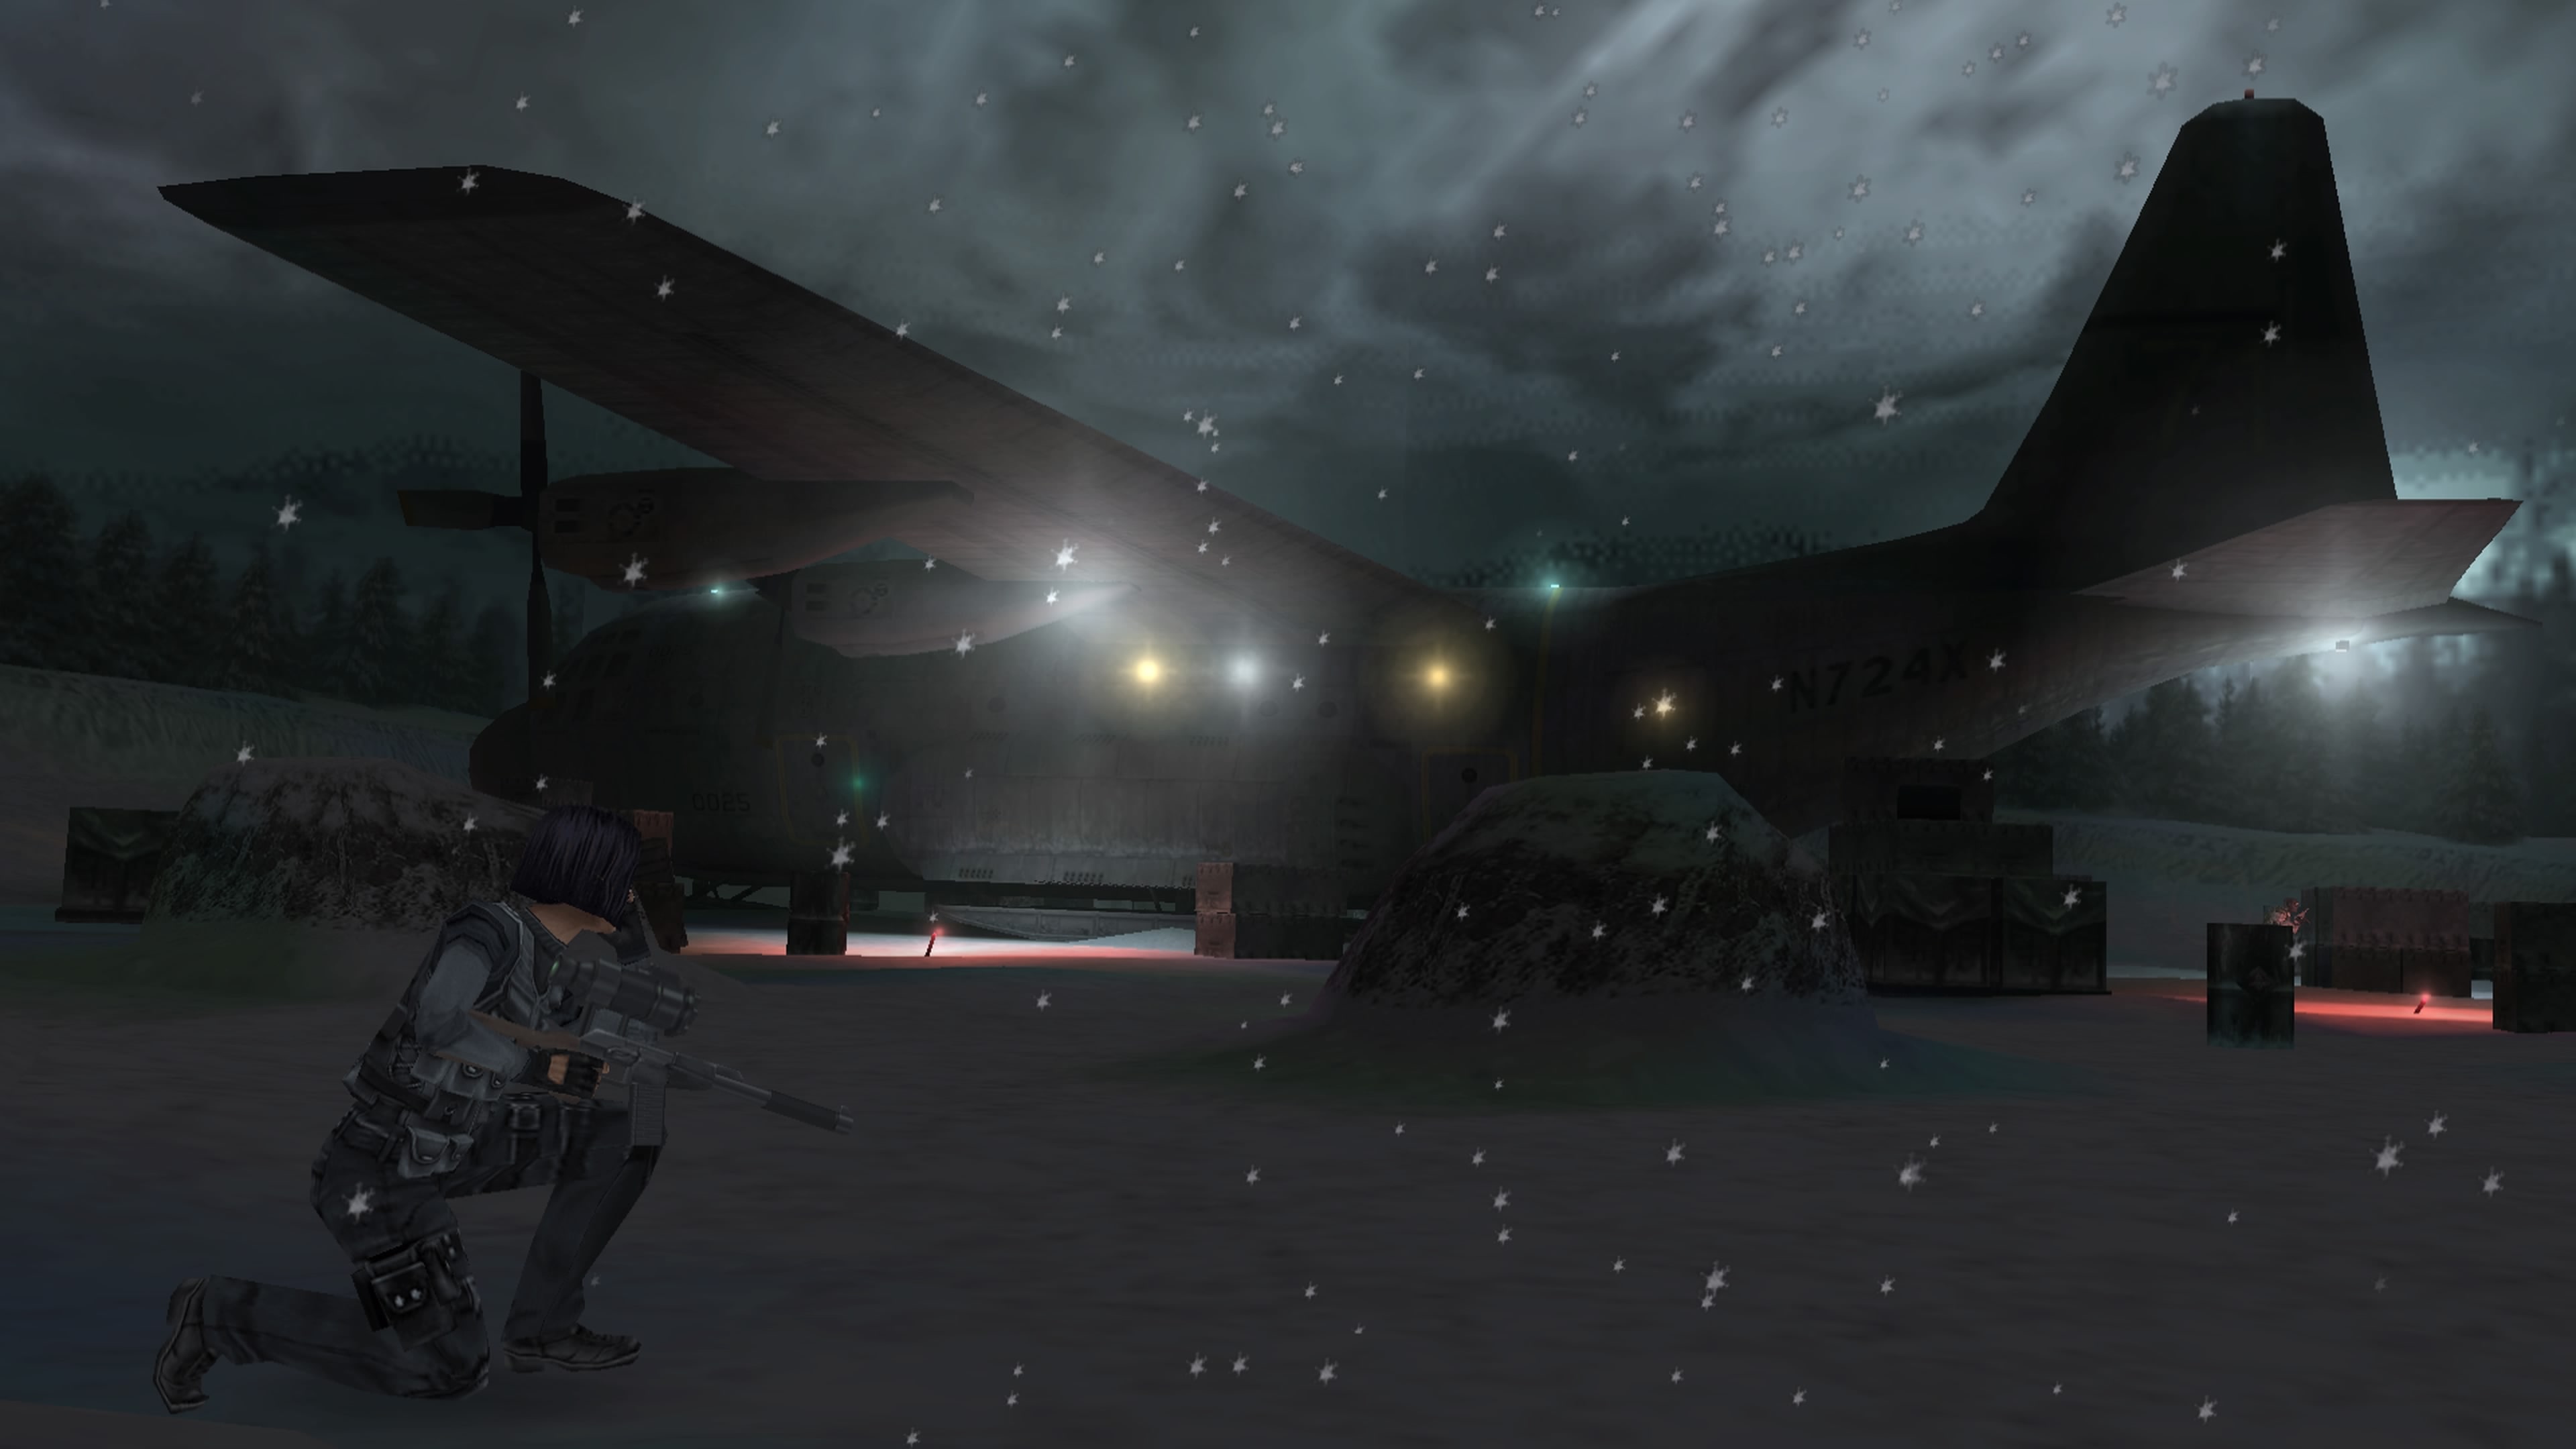 PSP classic Syphon Filter: Dark Mirror looks to be coming to PS Plus Deluxe  soon - Explosion Network